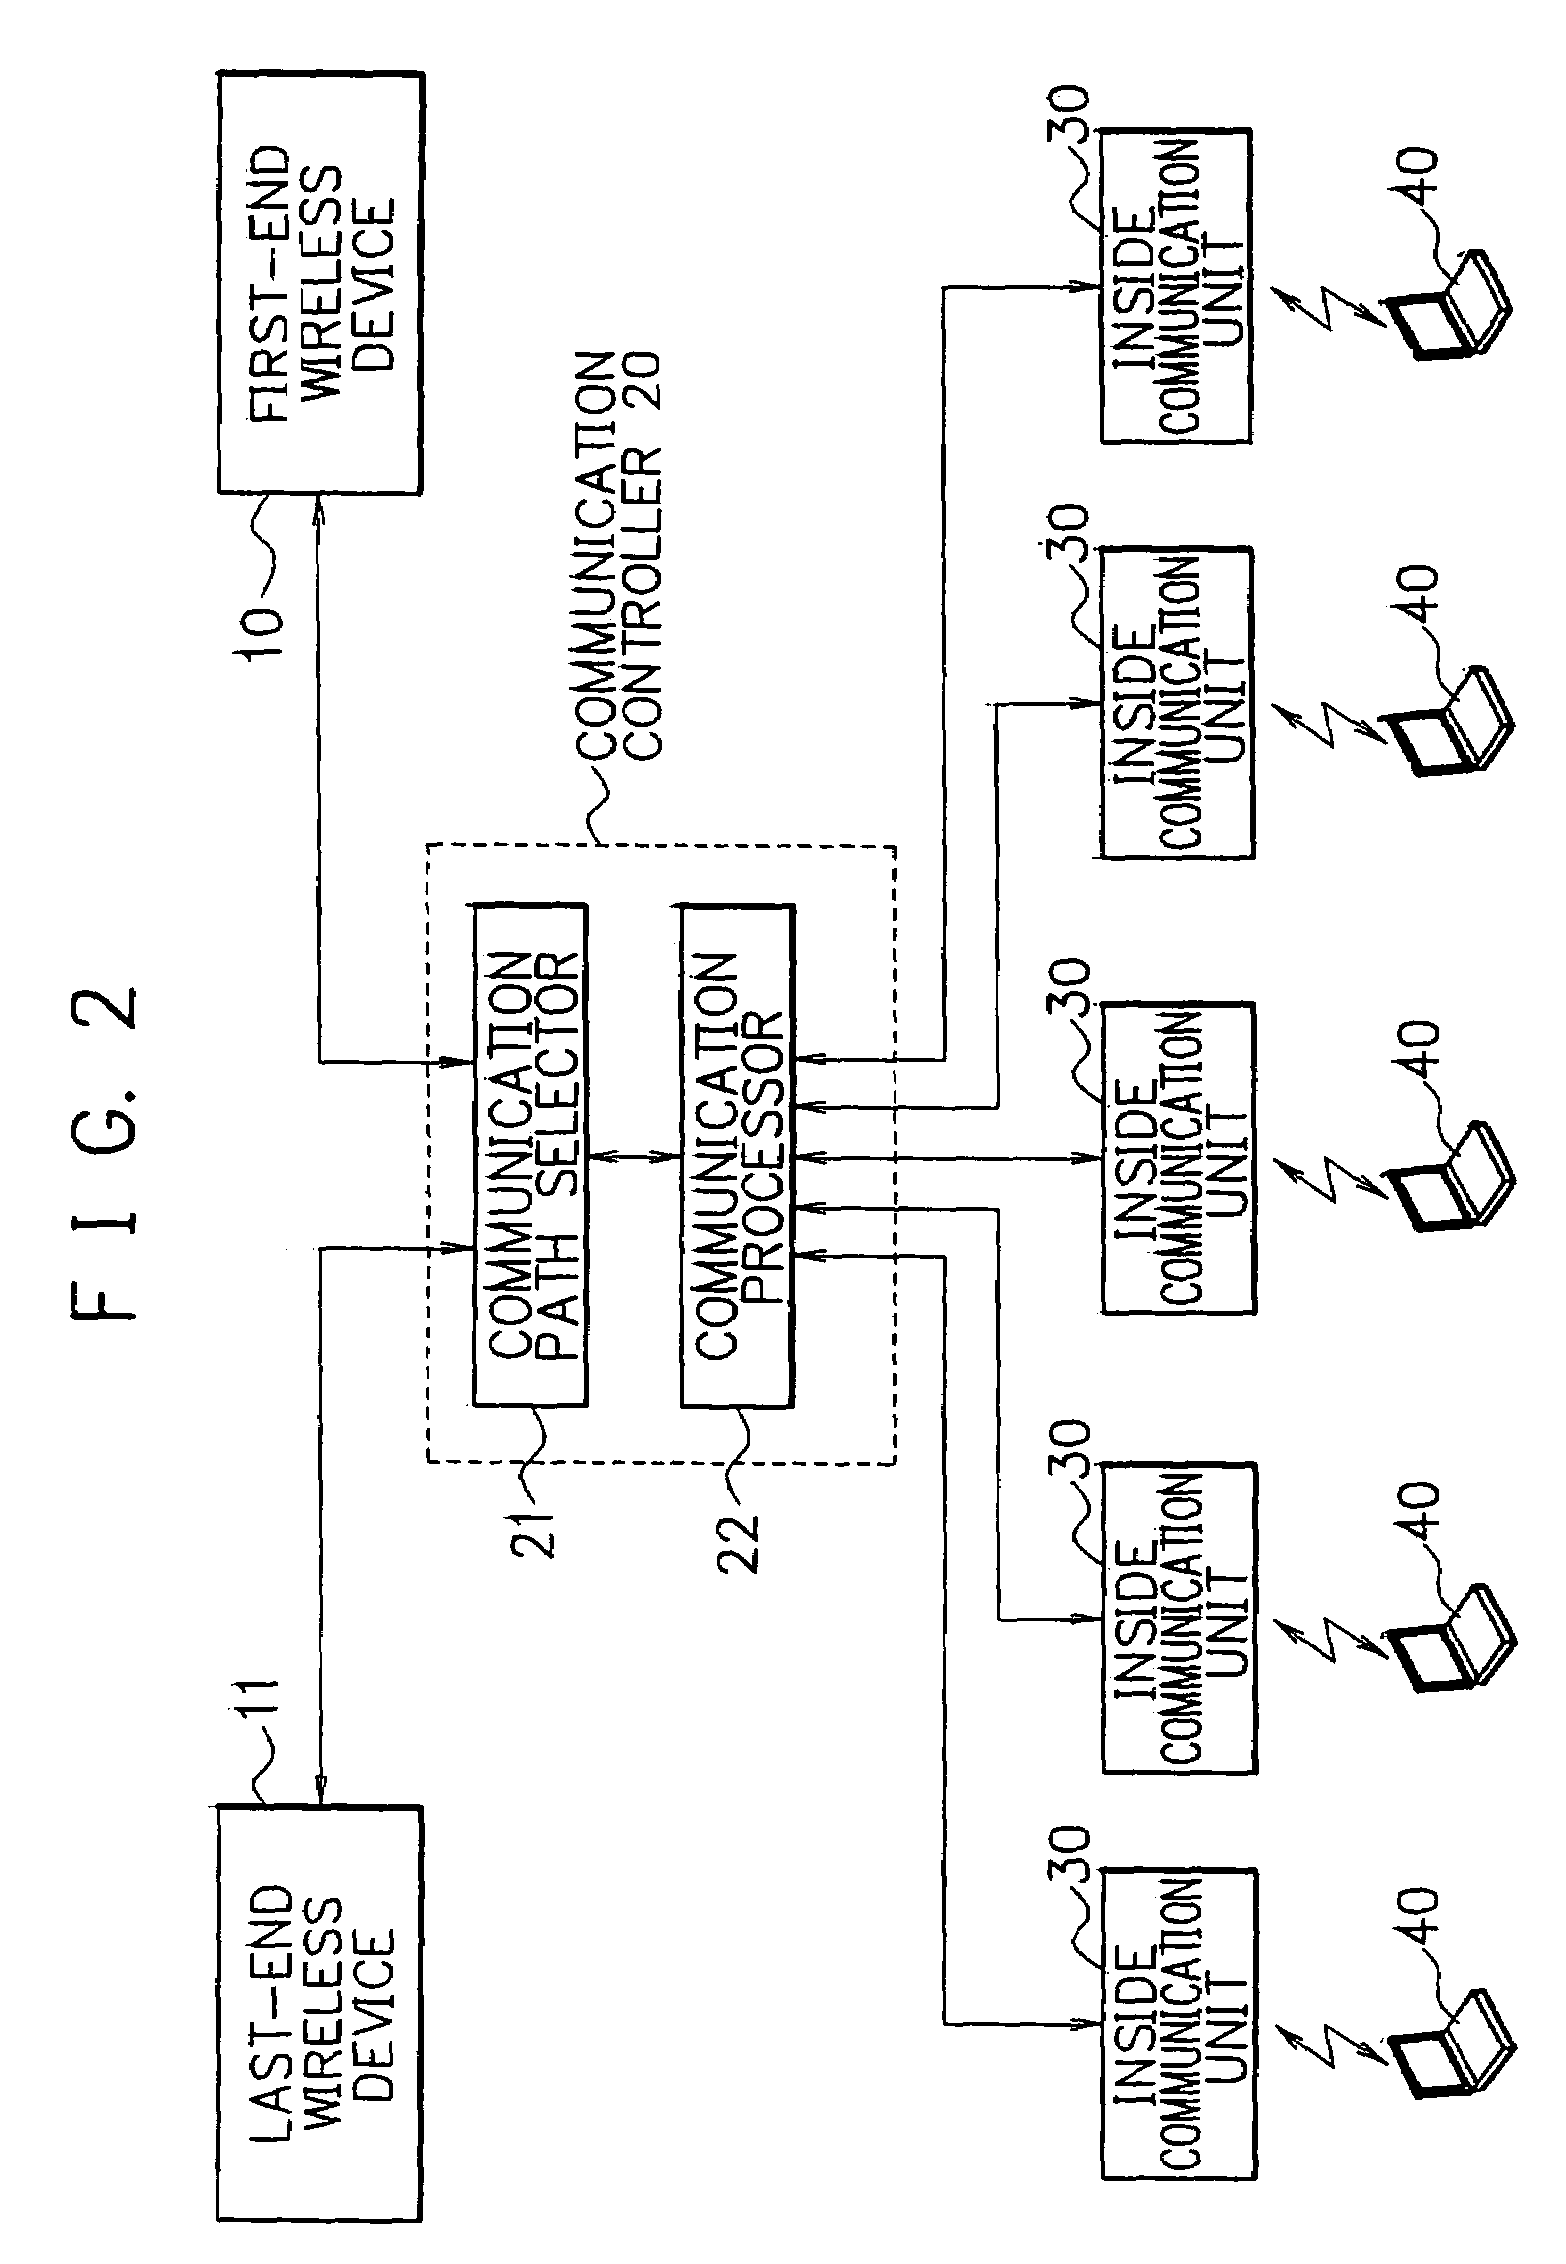 Handoff method for a communication system of a train